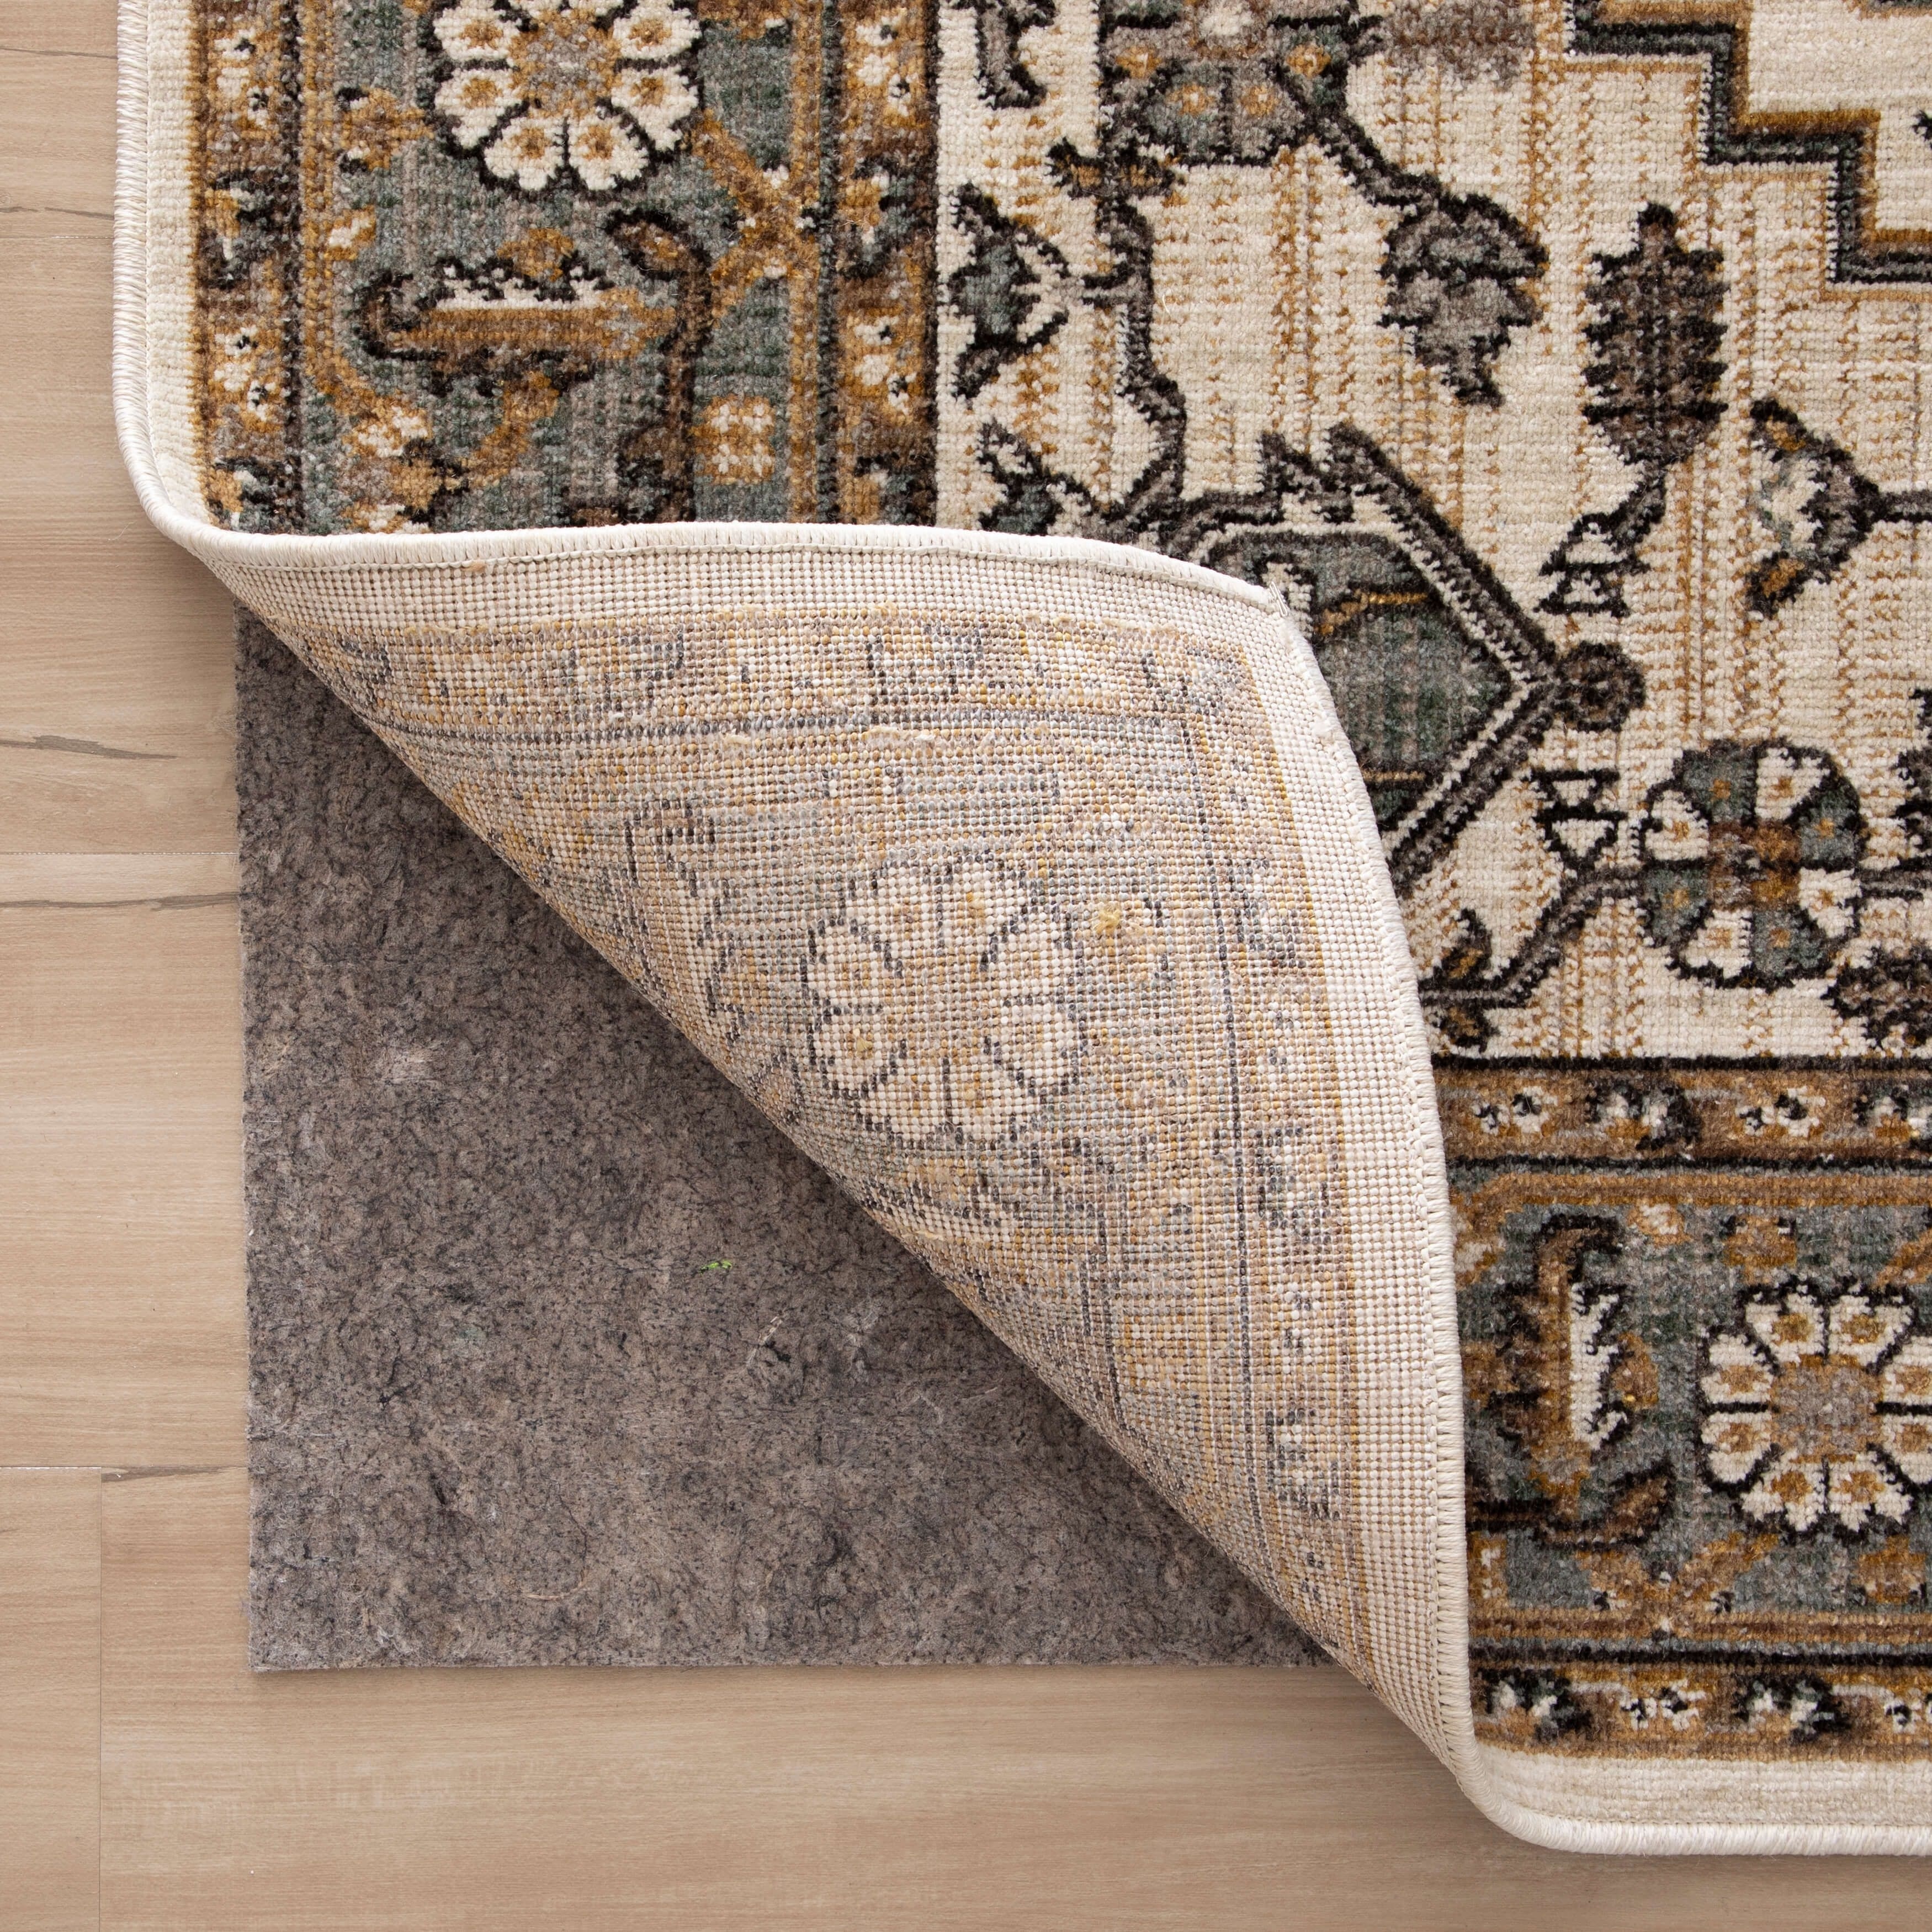 https://ak1.ostkcdn.com/images/products/is/images/direct/c79ffca85e0b1b9987a39d87d0fb00fe2ee135ca/Mohawk-Home-Pet-friendly-Dual-surface-Rug-Pad.jpg